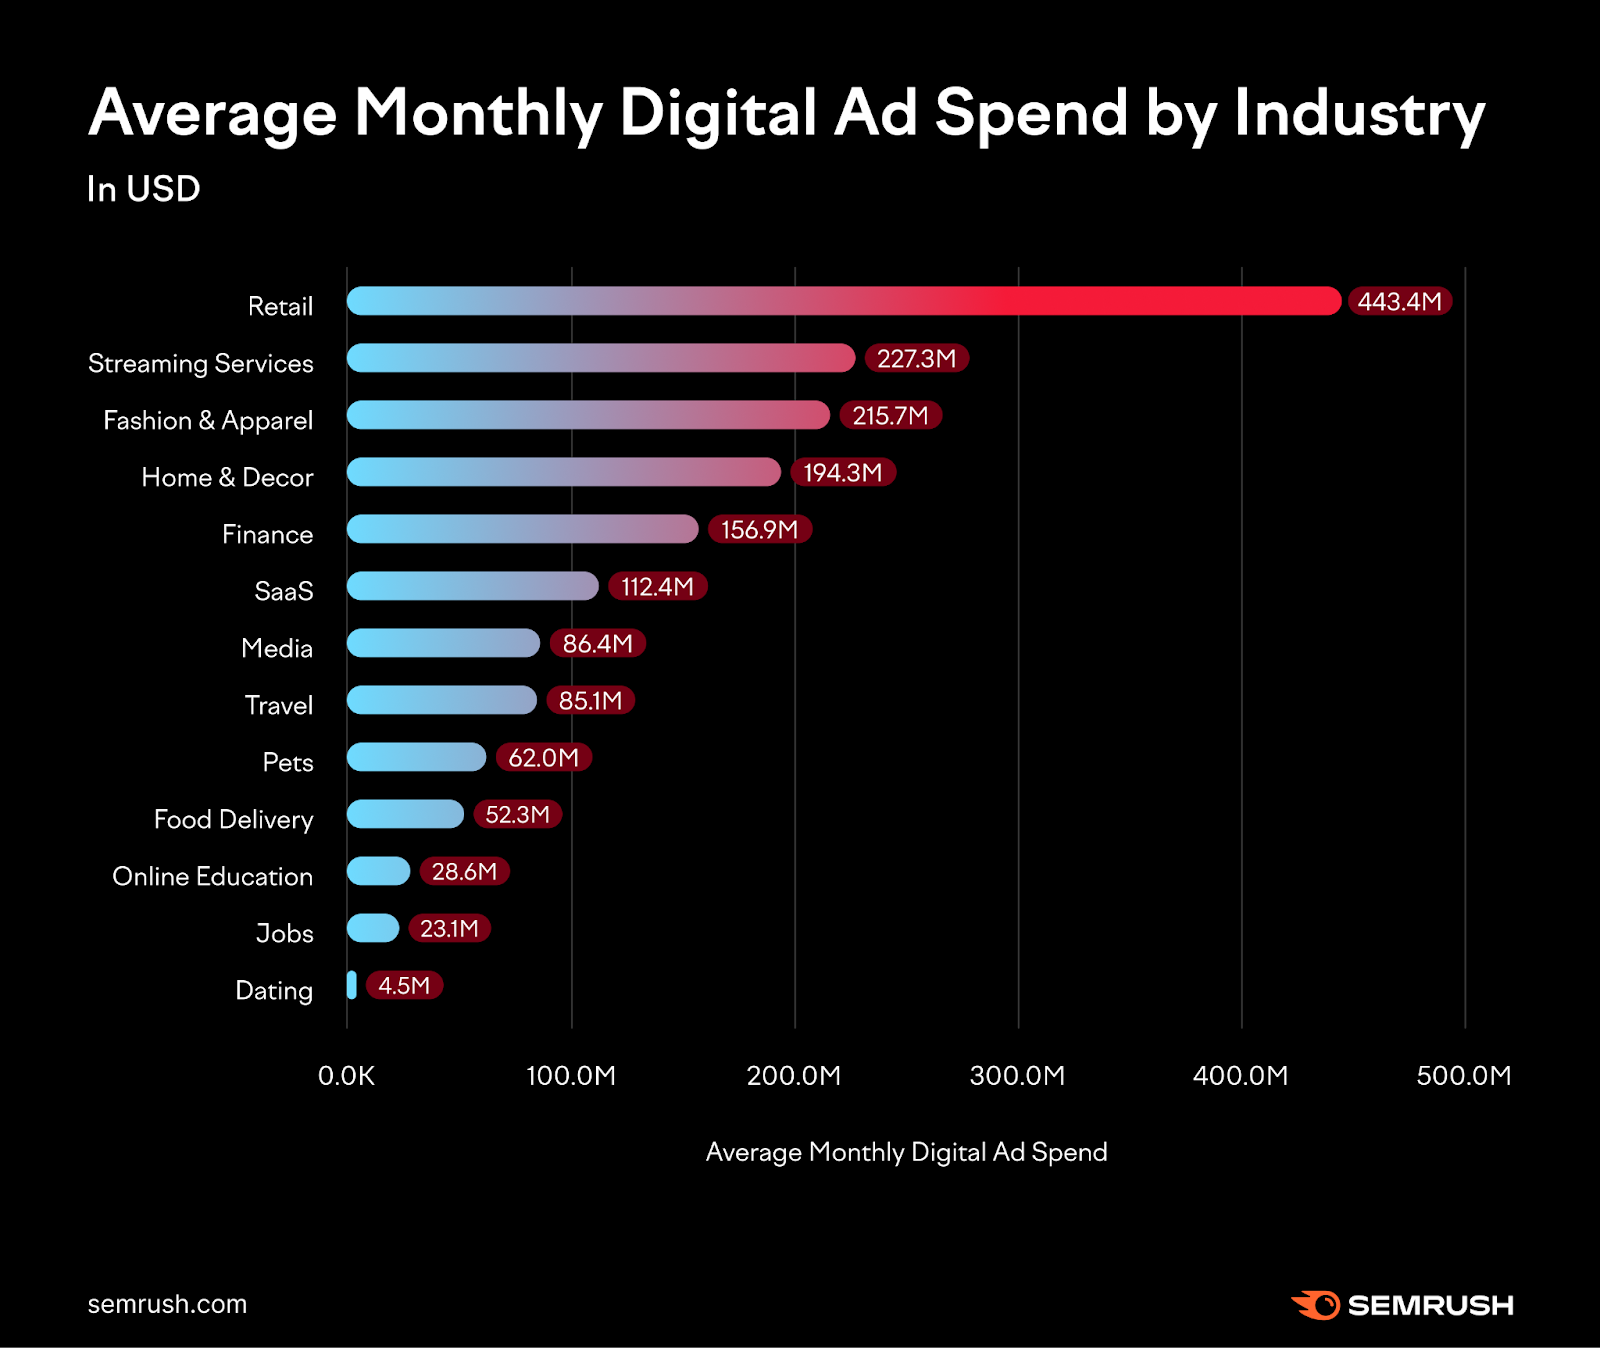 Horizontal bar chart with 13 bars, depicting in decreasing order, the average monthly digital ad spend by various industries.